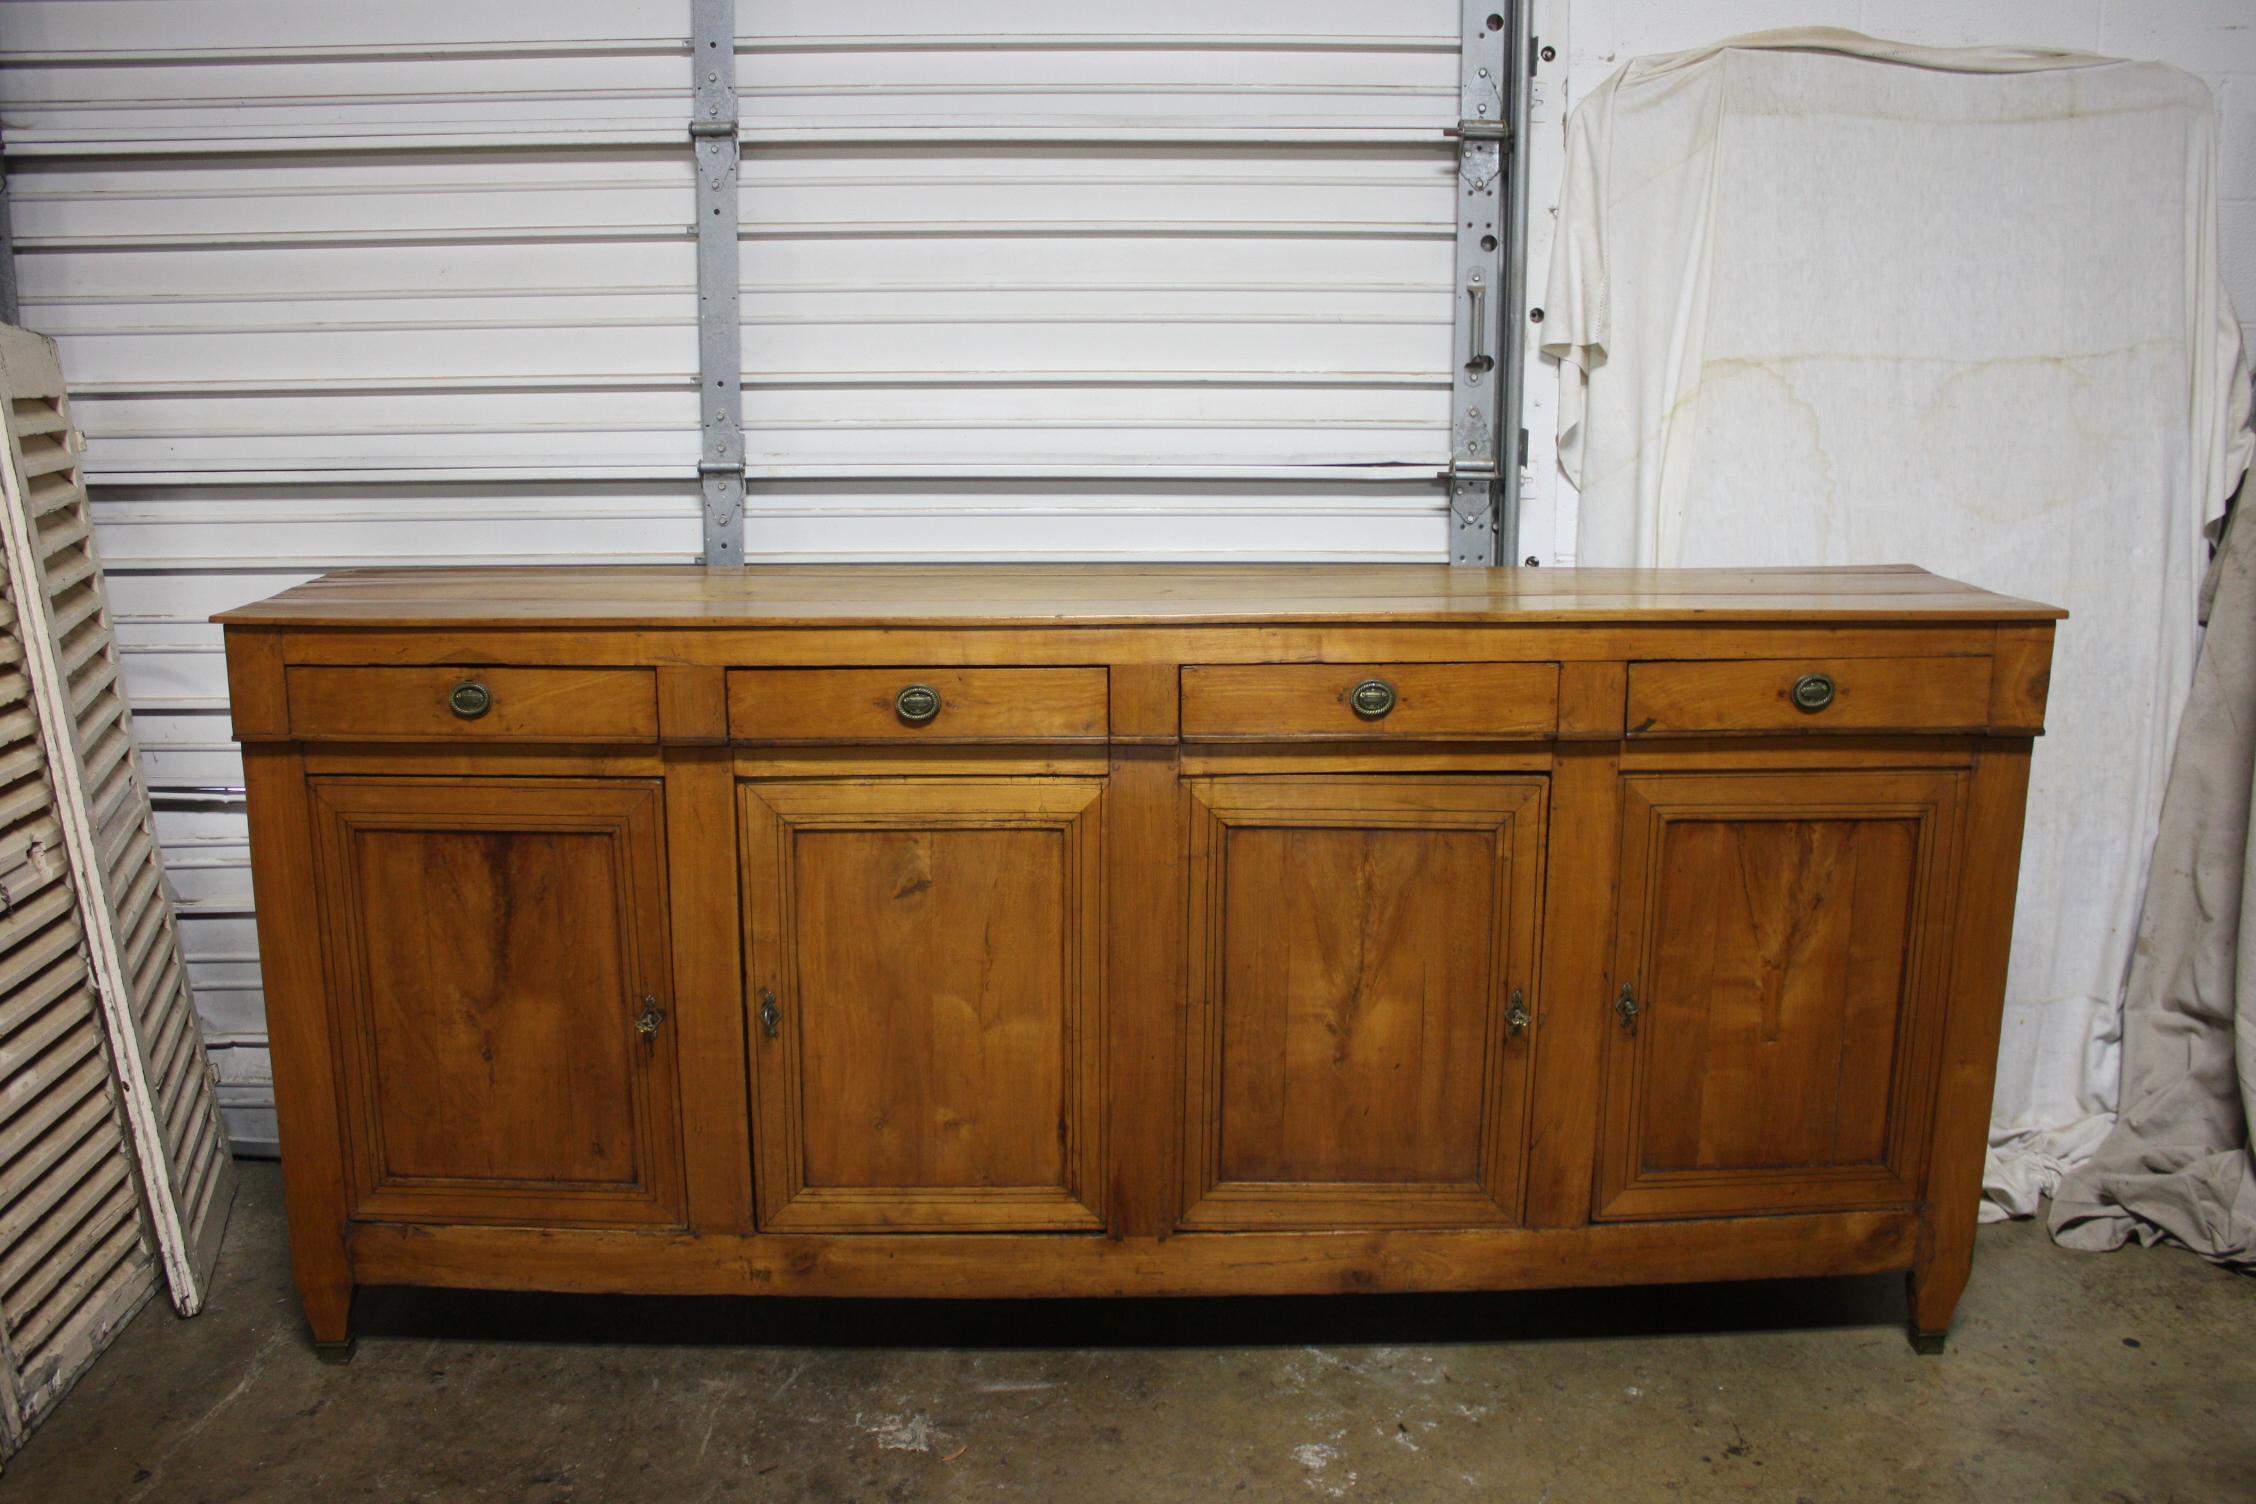 Beautiful French Directoire Sideboard with 4 doors and 4 drawers with black inlay on the doors. Long and narrow, it match very well with modern furniture.